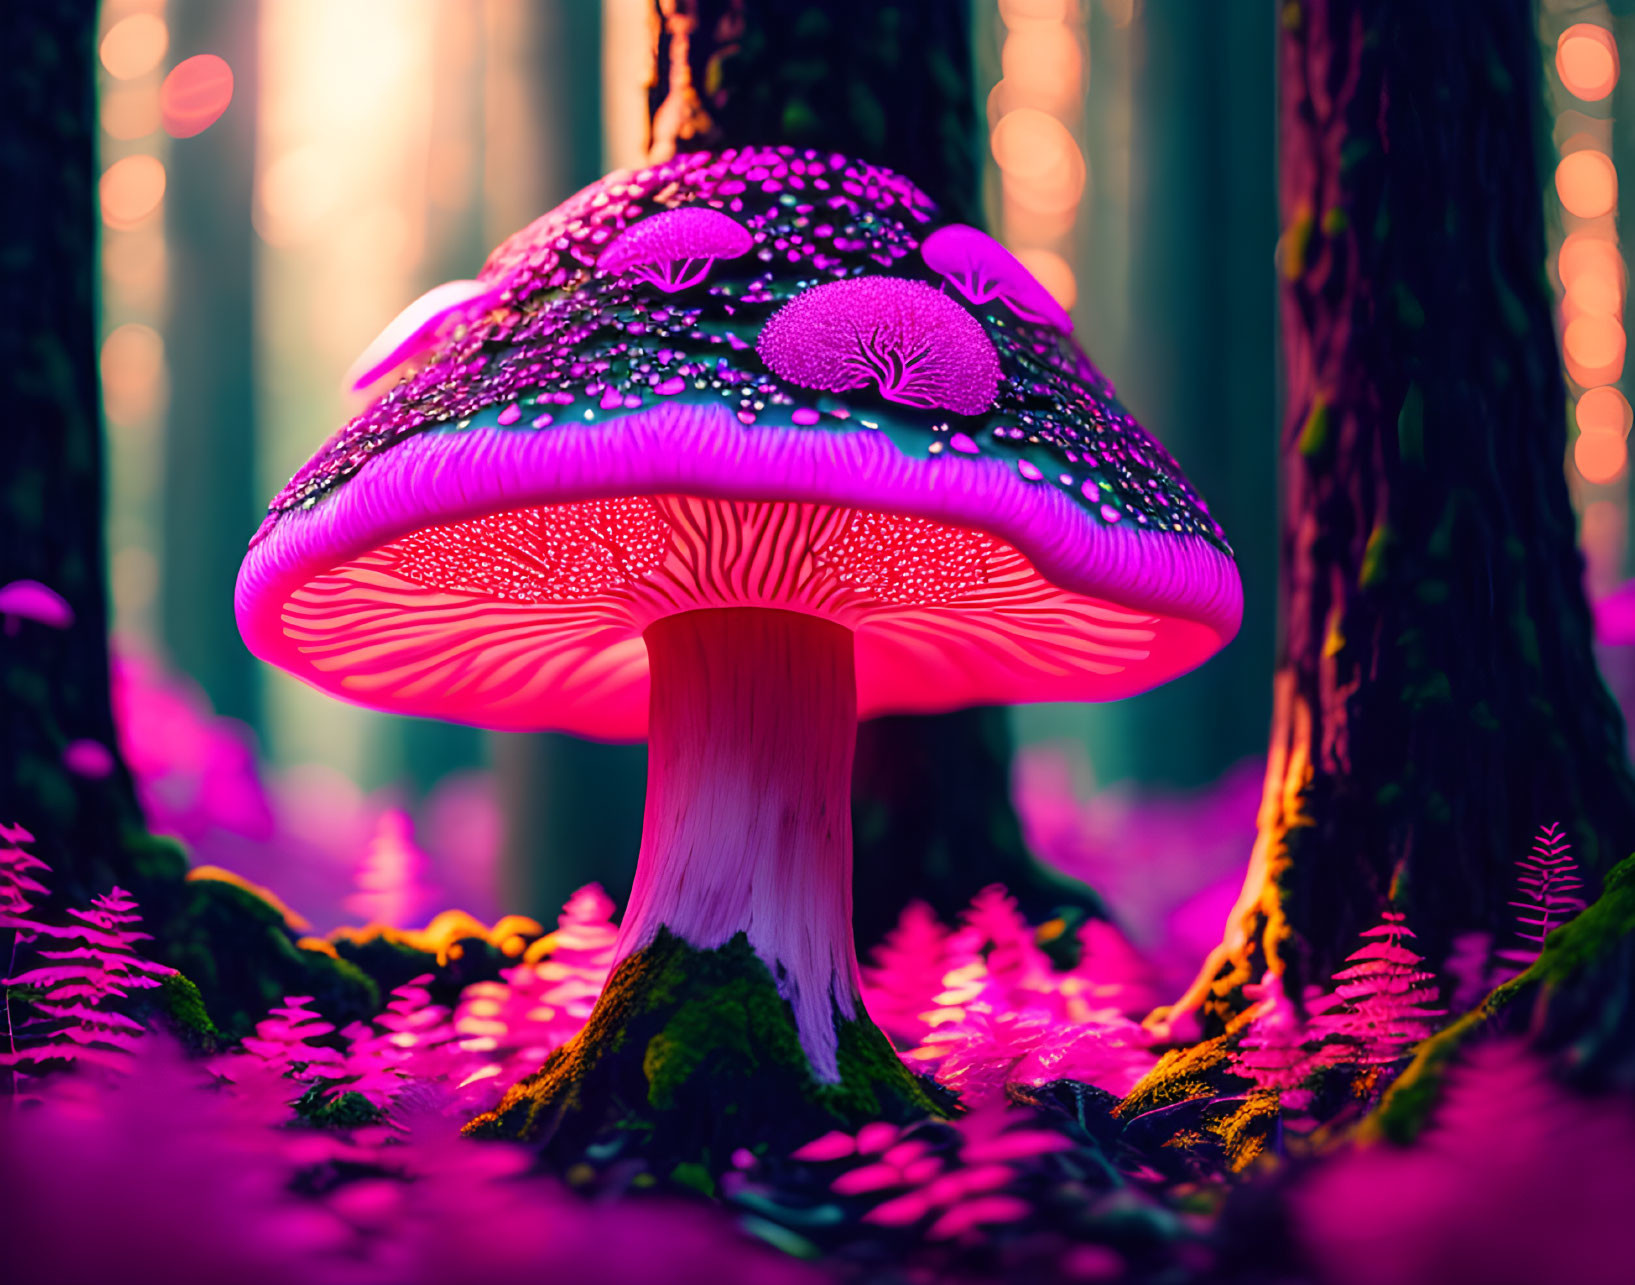 Neon-colored mushroom in fantastical forest setting